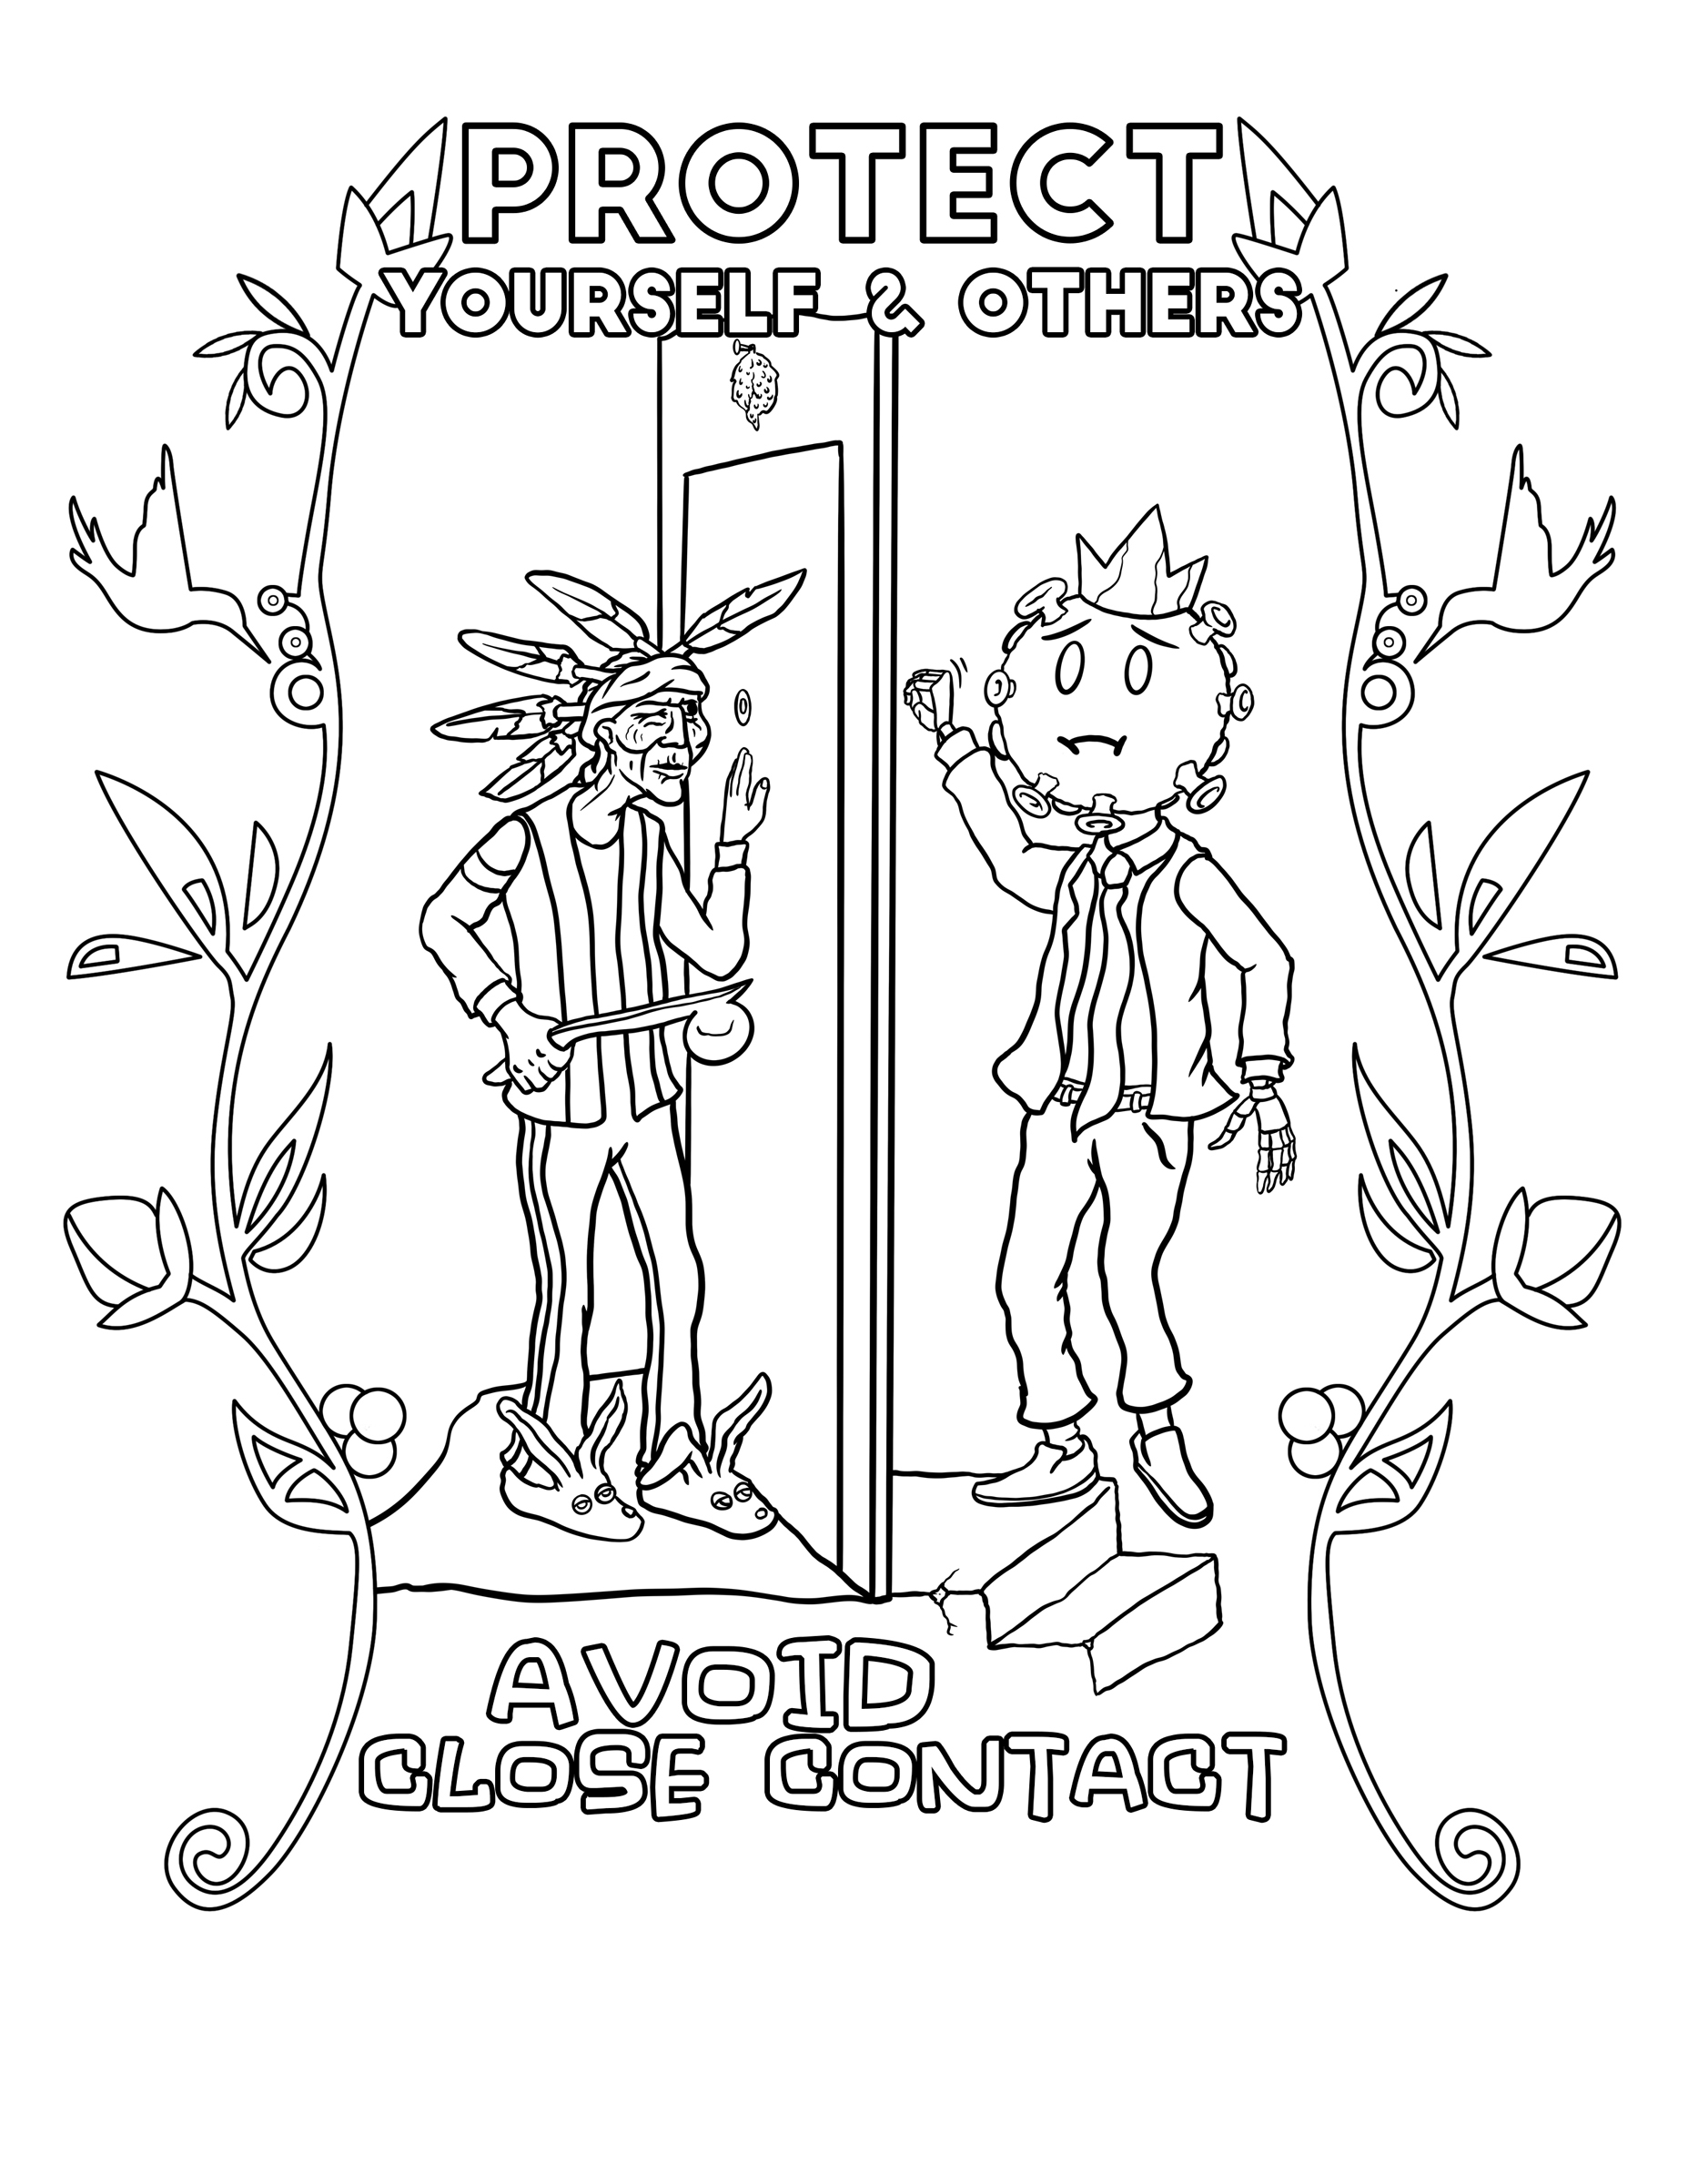 Coloring sheet by Jonathan Thunder that says protect yourself and others with characters and vines